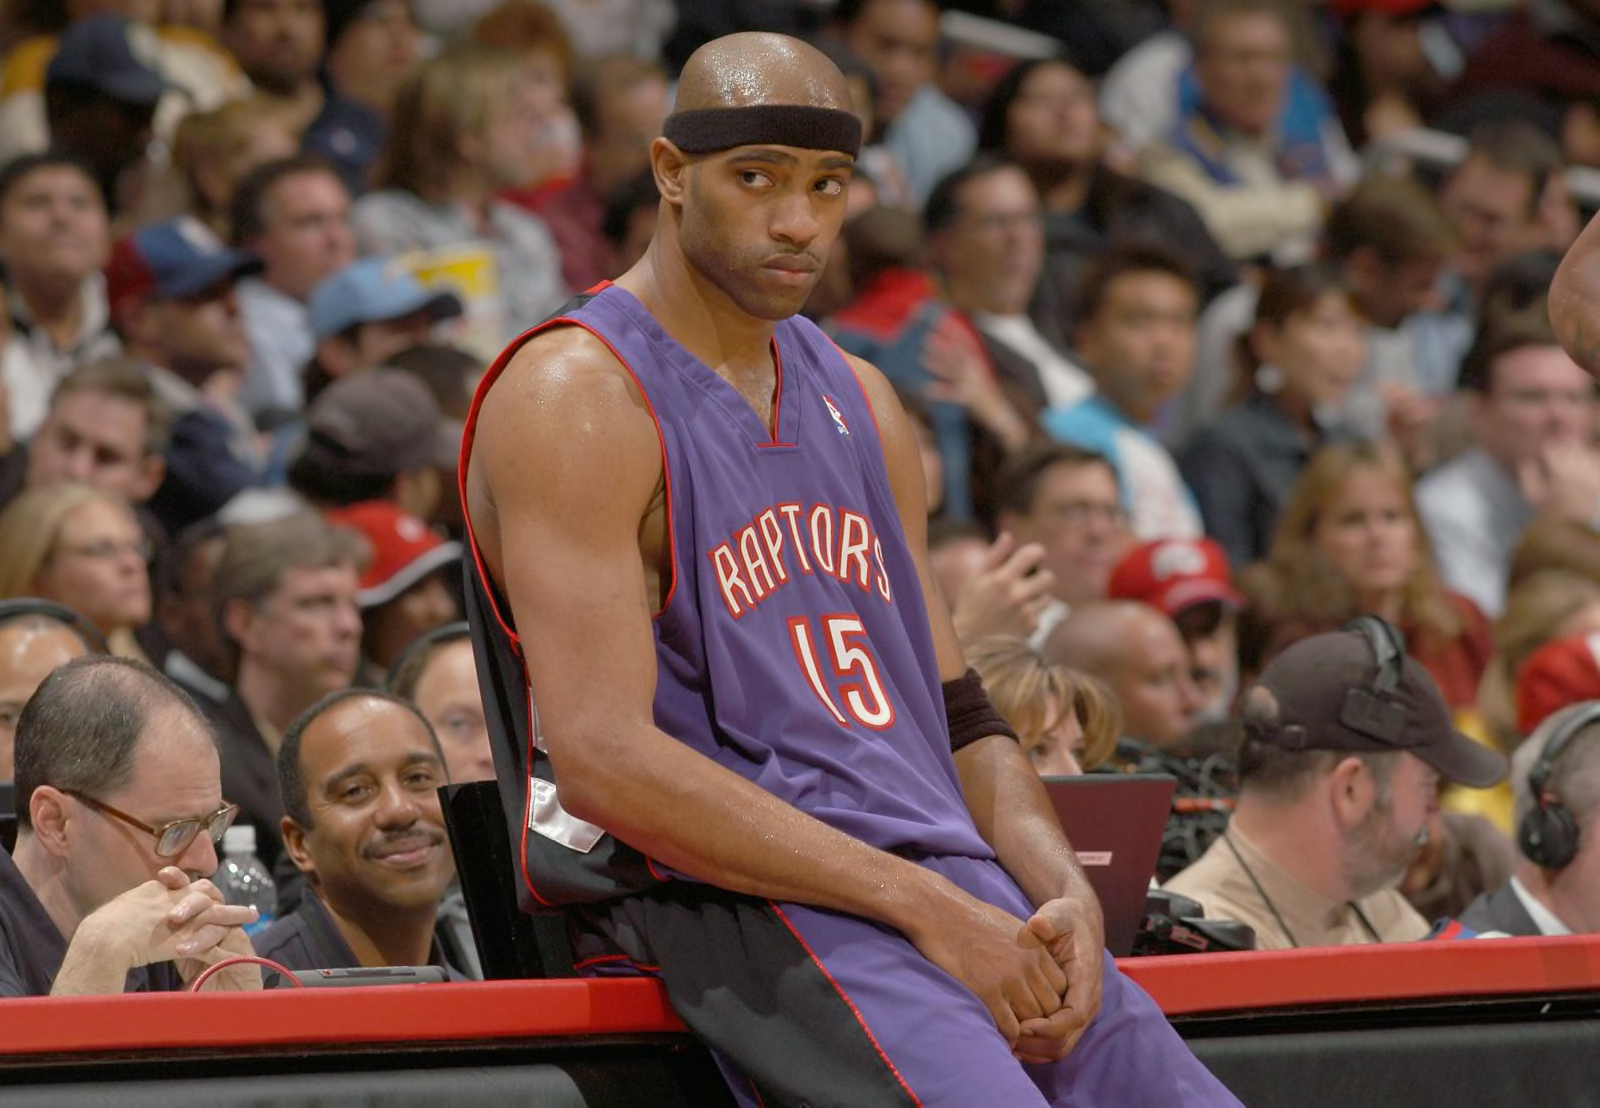 Toronto Raptors and Vince Carter: The 2001 playoffs and the rise